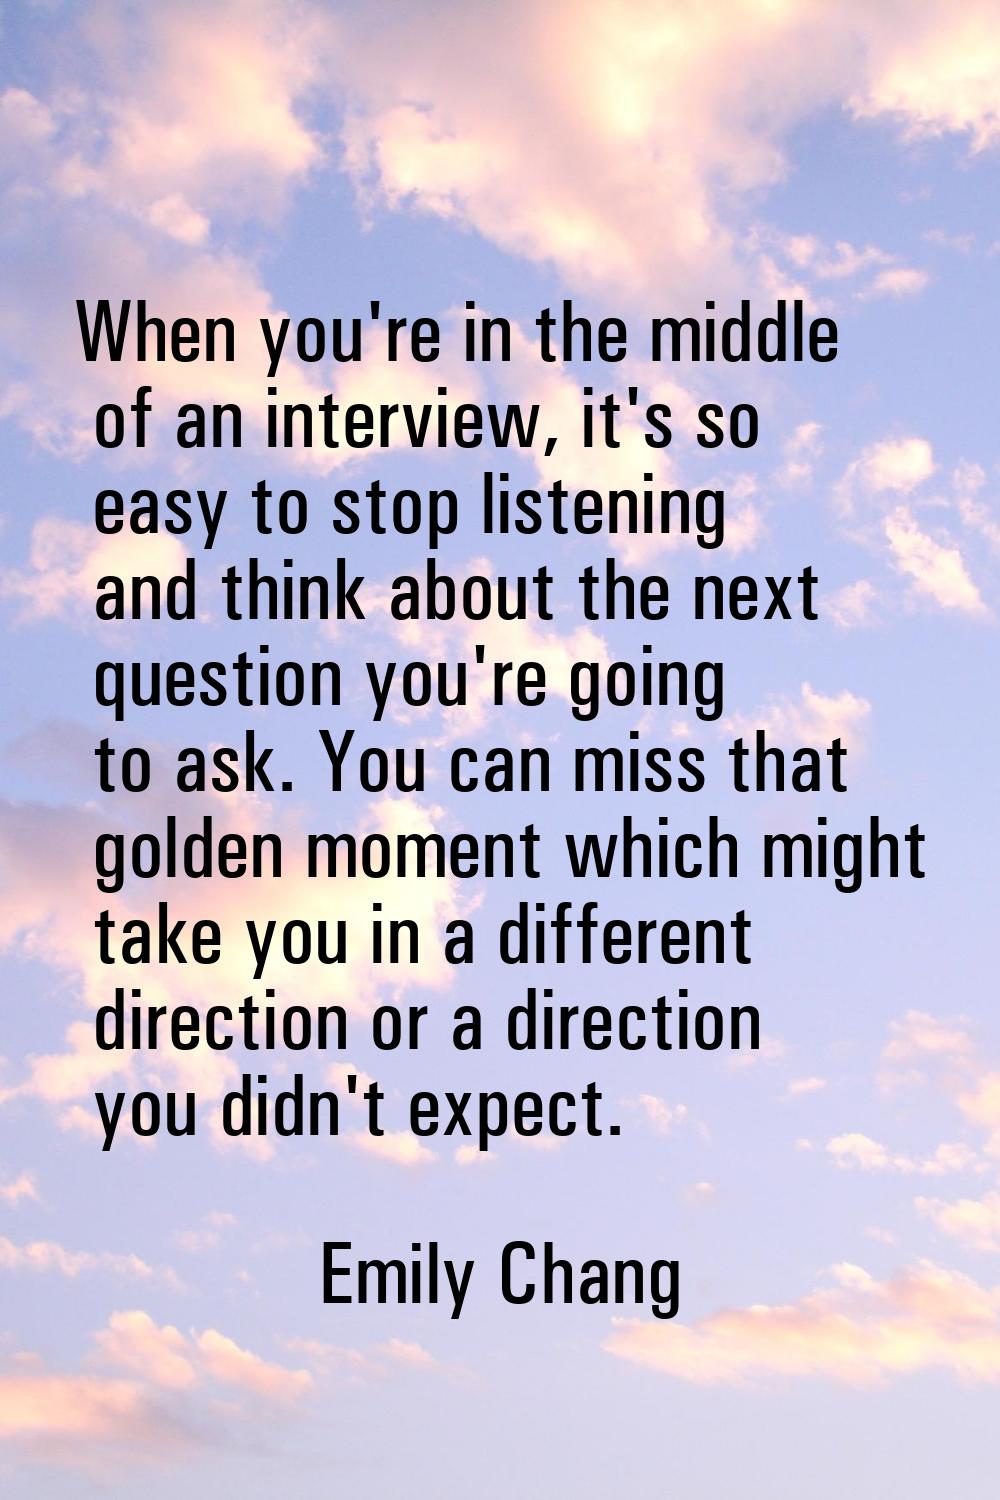 When you're in the middle of an interview, it's so easy to stop listening and think about the next 